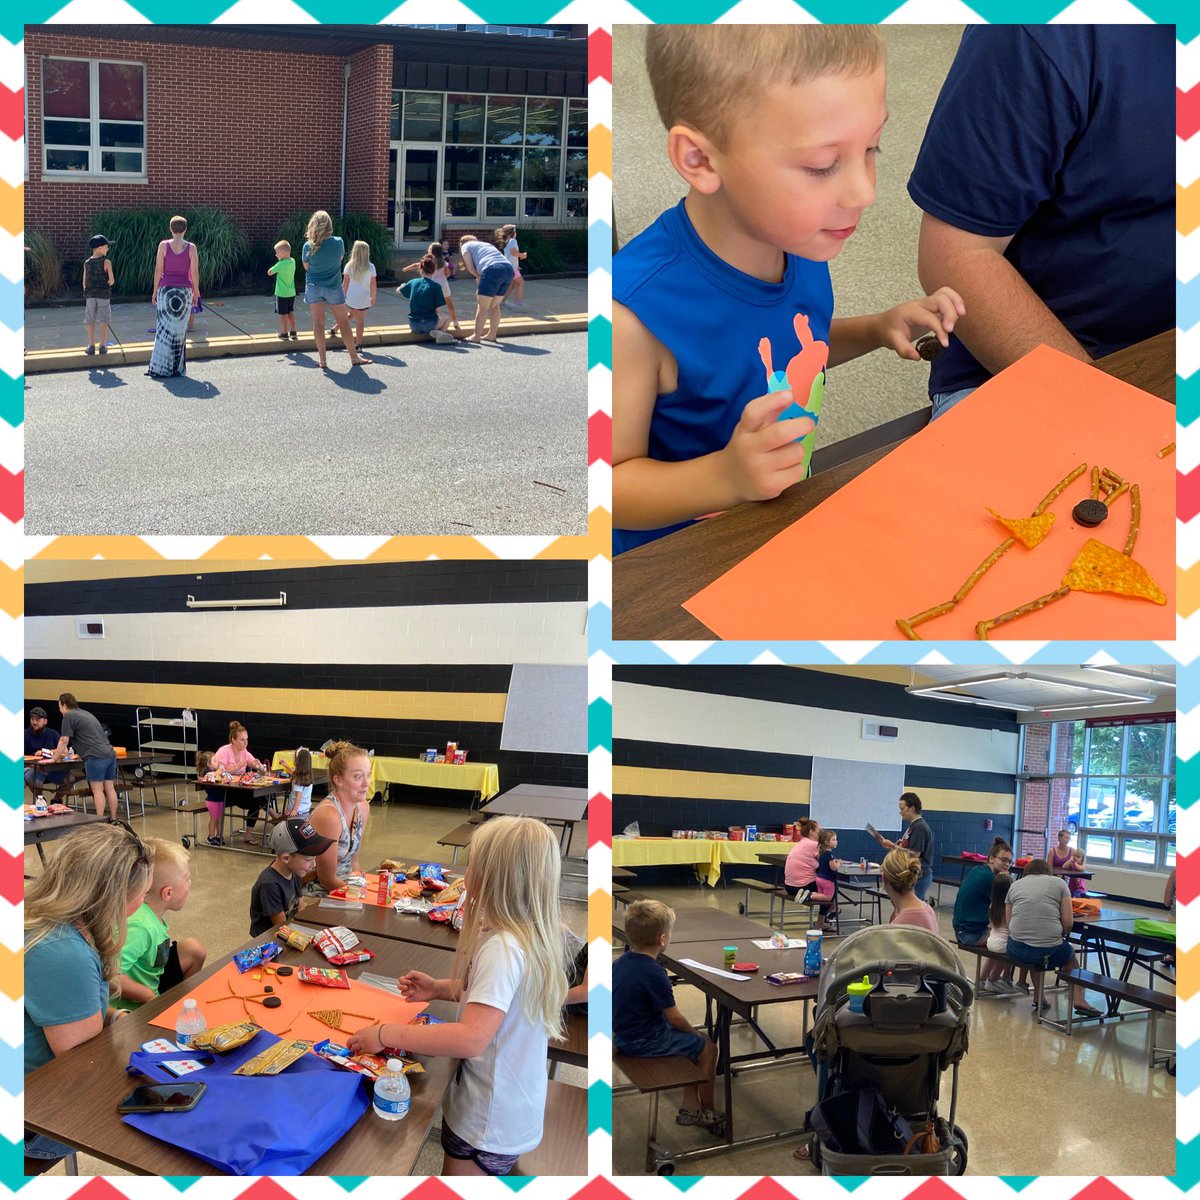 QE kindergarten families came together today for some fun math activities! We look forward to seeing families at our August meet at the playground event! #QvillePride #inspiring #connecting